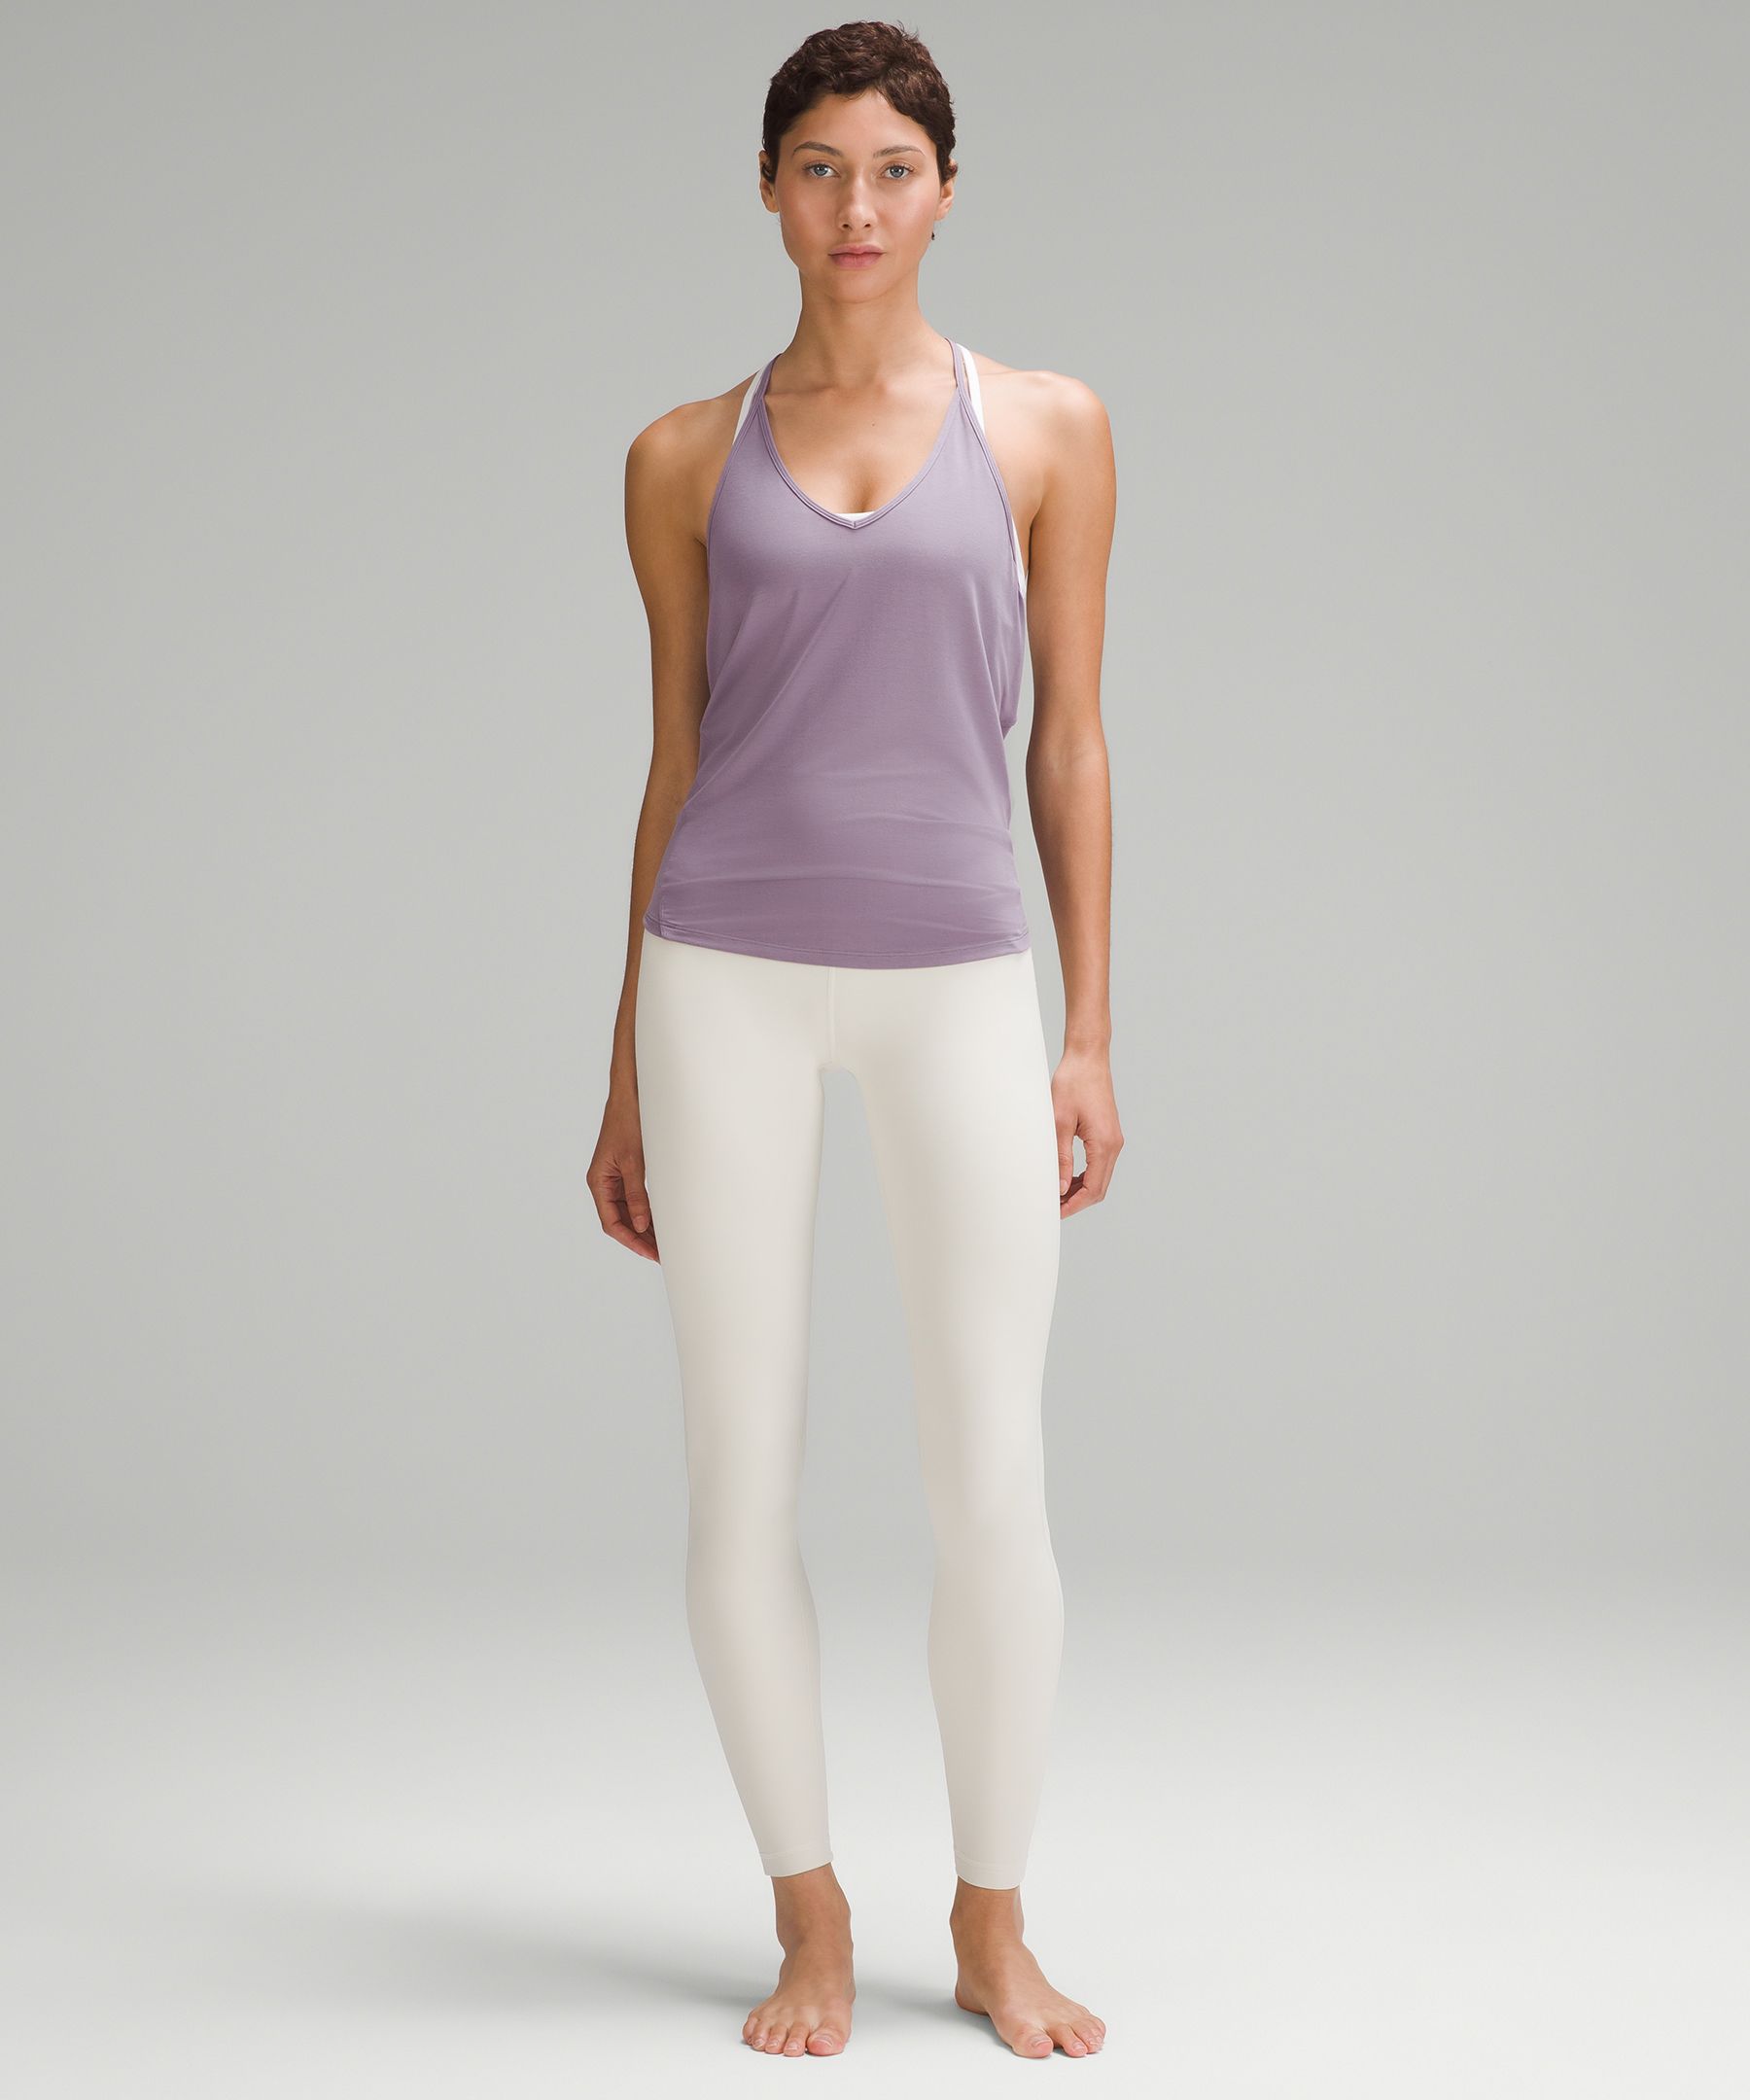 Fit Review: lululemon Modal-Silk Yoga Tank Top & Open-Back Cropped